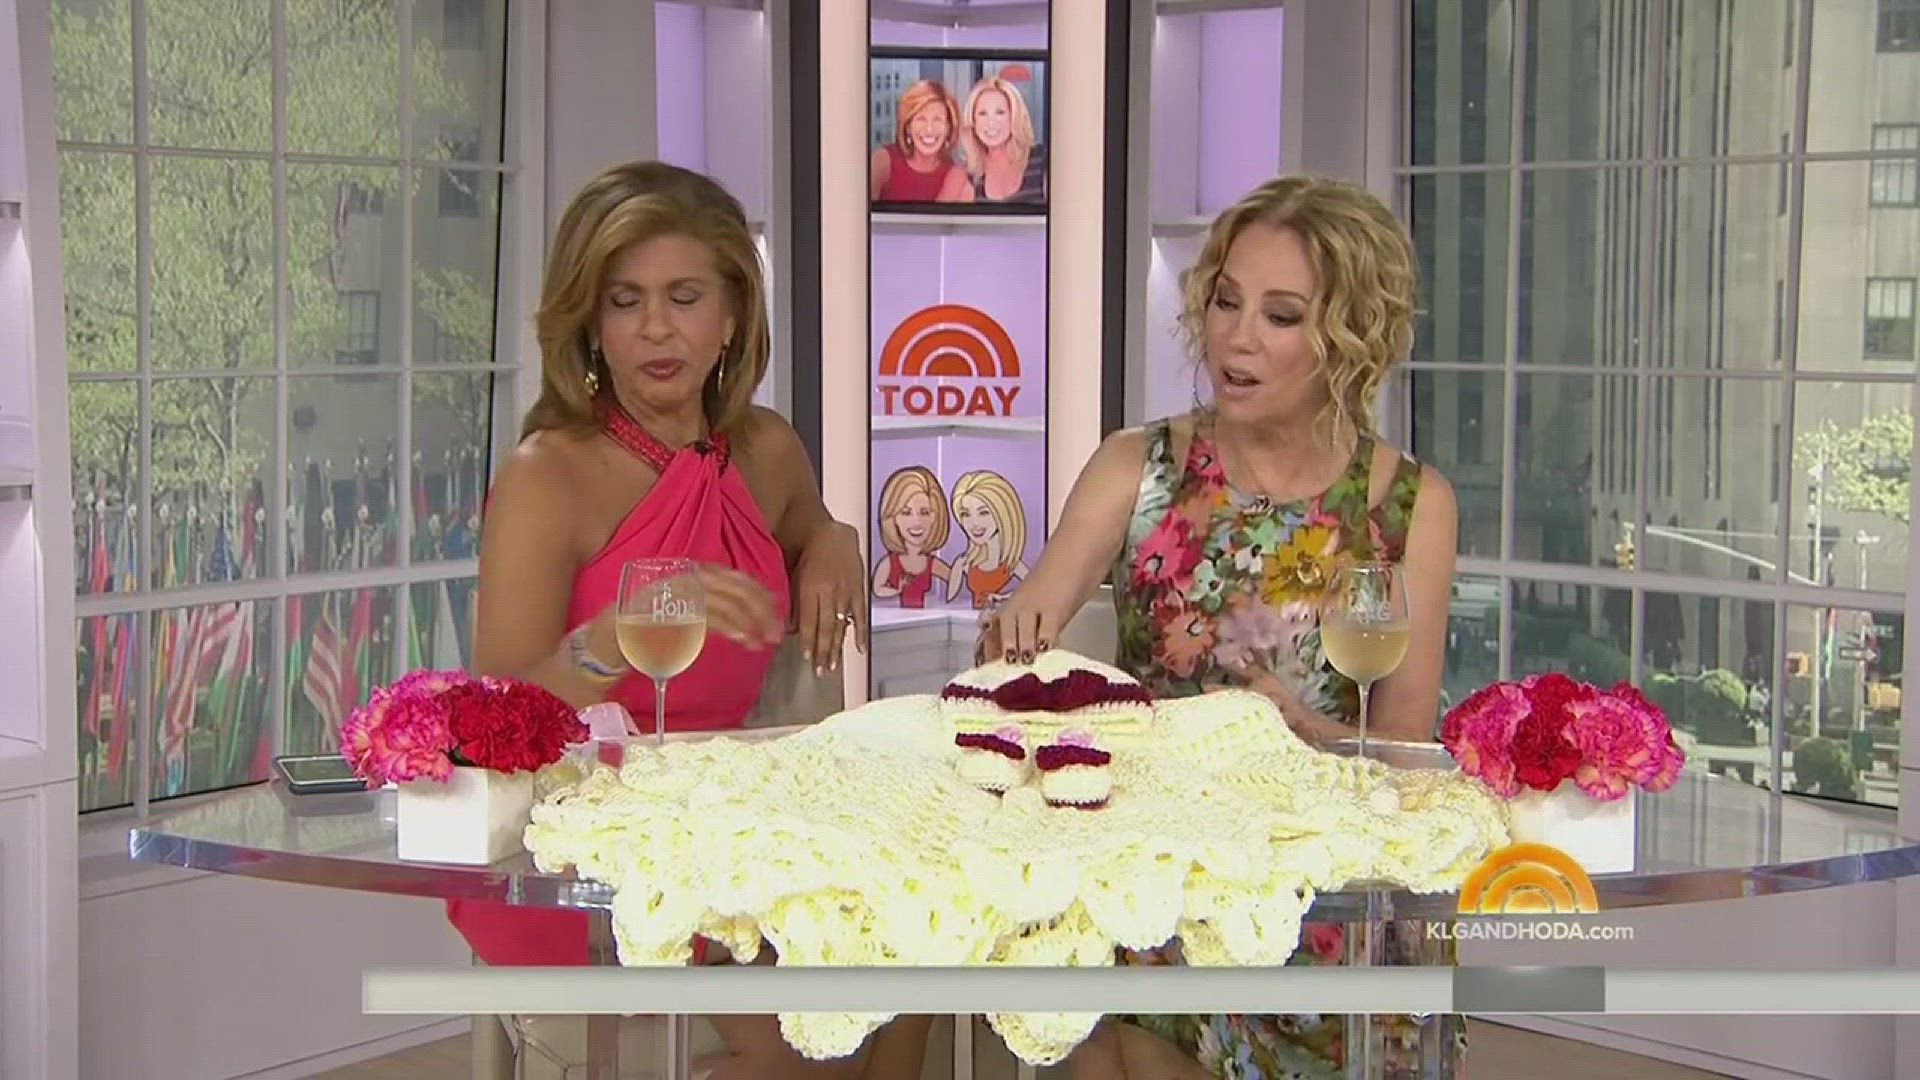 Someone from Knoxville sent Hoda Kotb a gift for her new baby. But didn't leave contact info to thank her! (5/2/17) (Video: NBC)